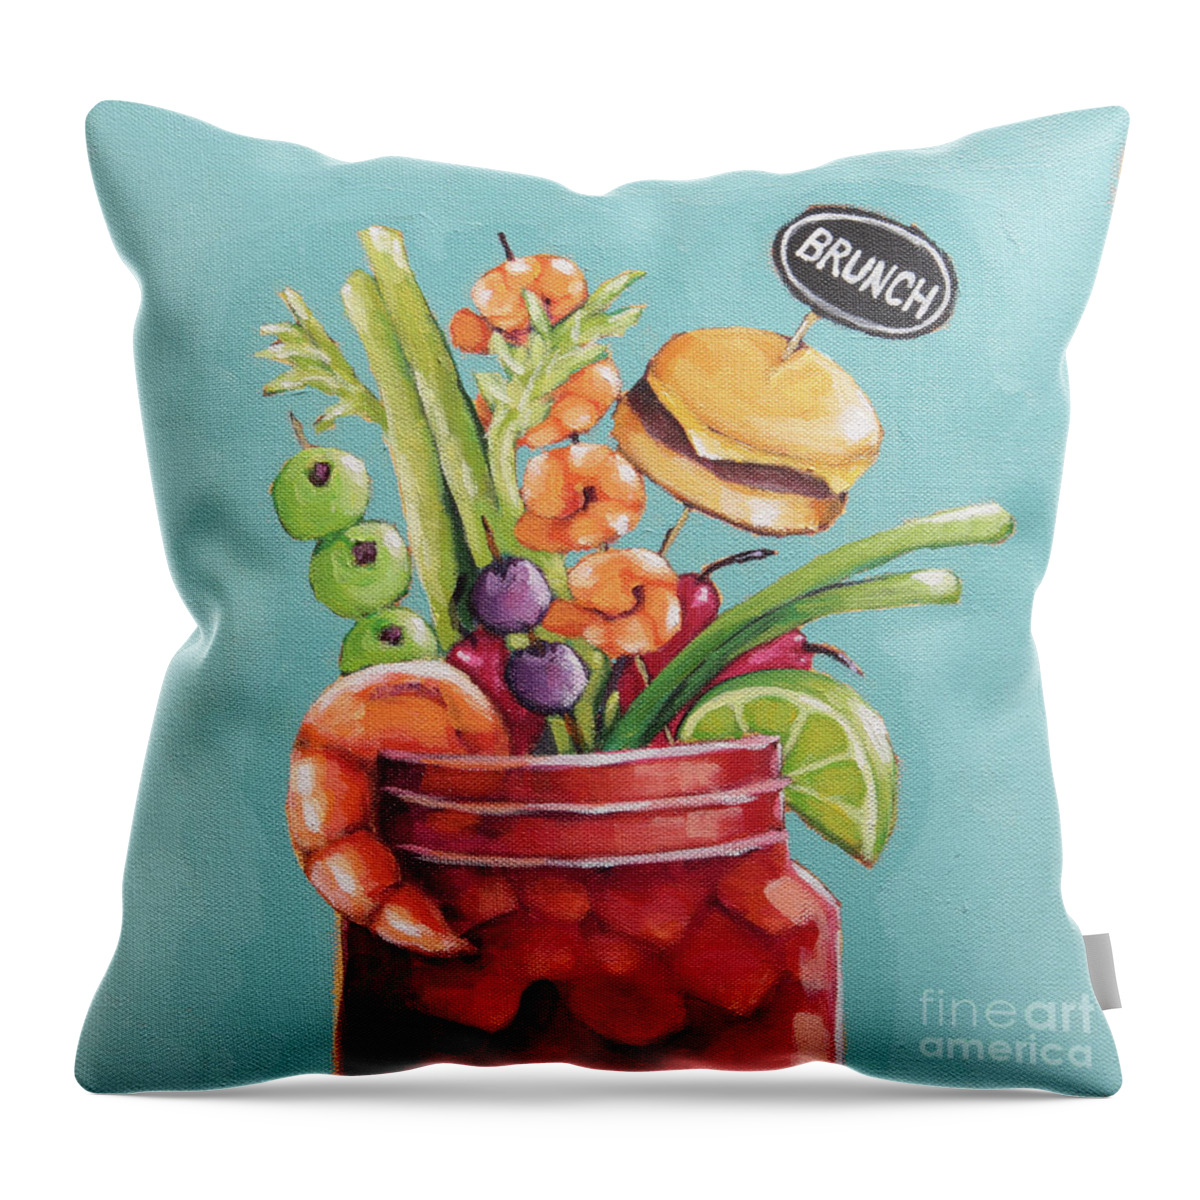 Bloody Mary Throw Pillow featuring the painting Bloody Mary Brunch by Lucia Stewart